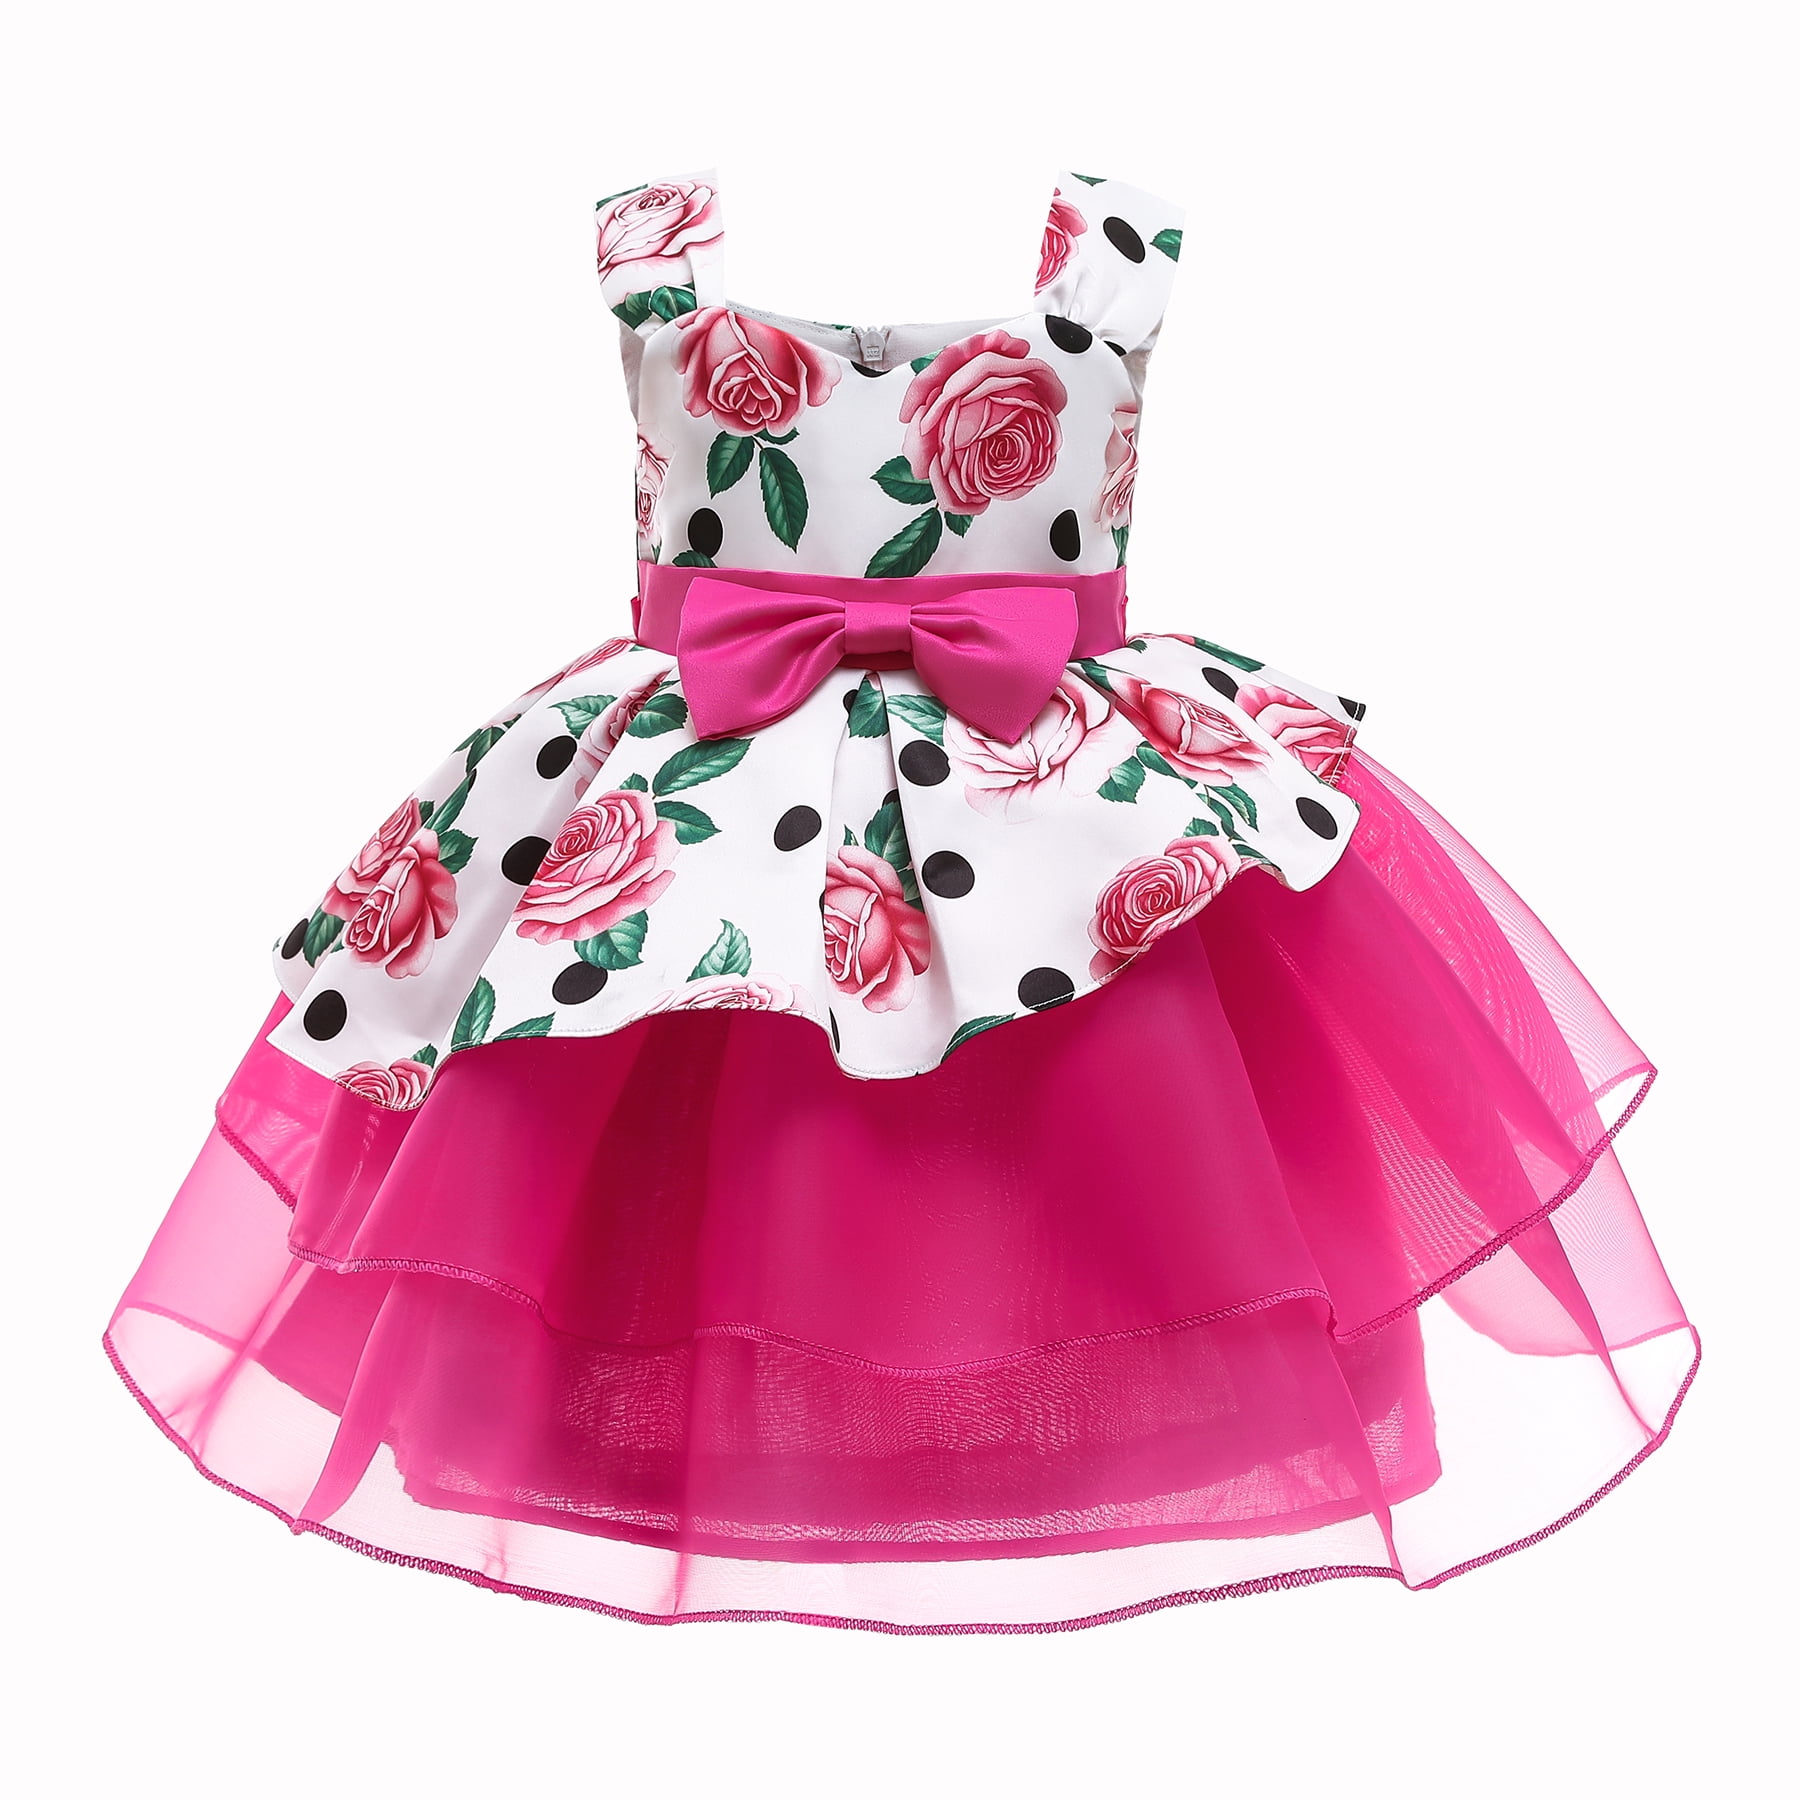 MIKRDOO Princess Dress For 2T Toddler Baby Girls Floral Print Off The Shoulder Gauze Sleeveless Puffy Dress Princess One Piece Party Dress Years,White - Walmart.com